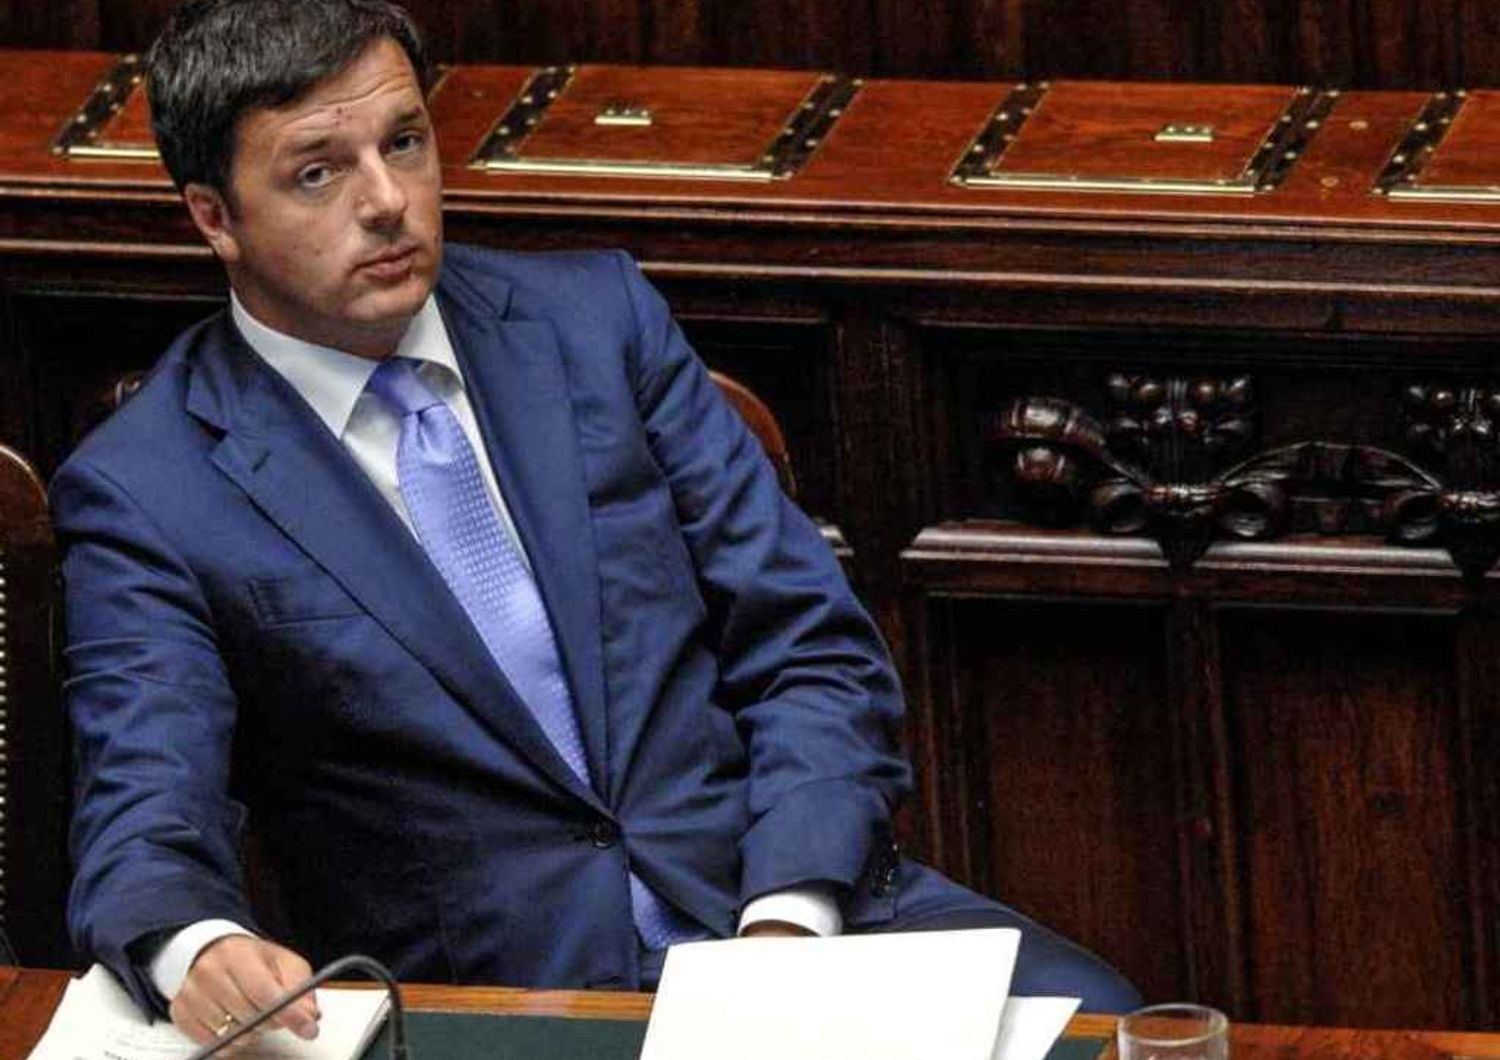 Italy's reforms must be passed together, says PM Renzi